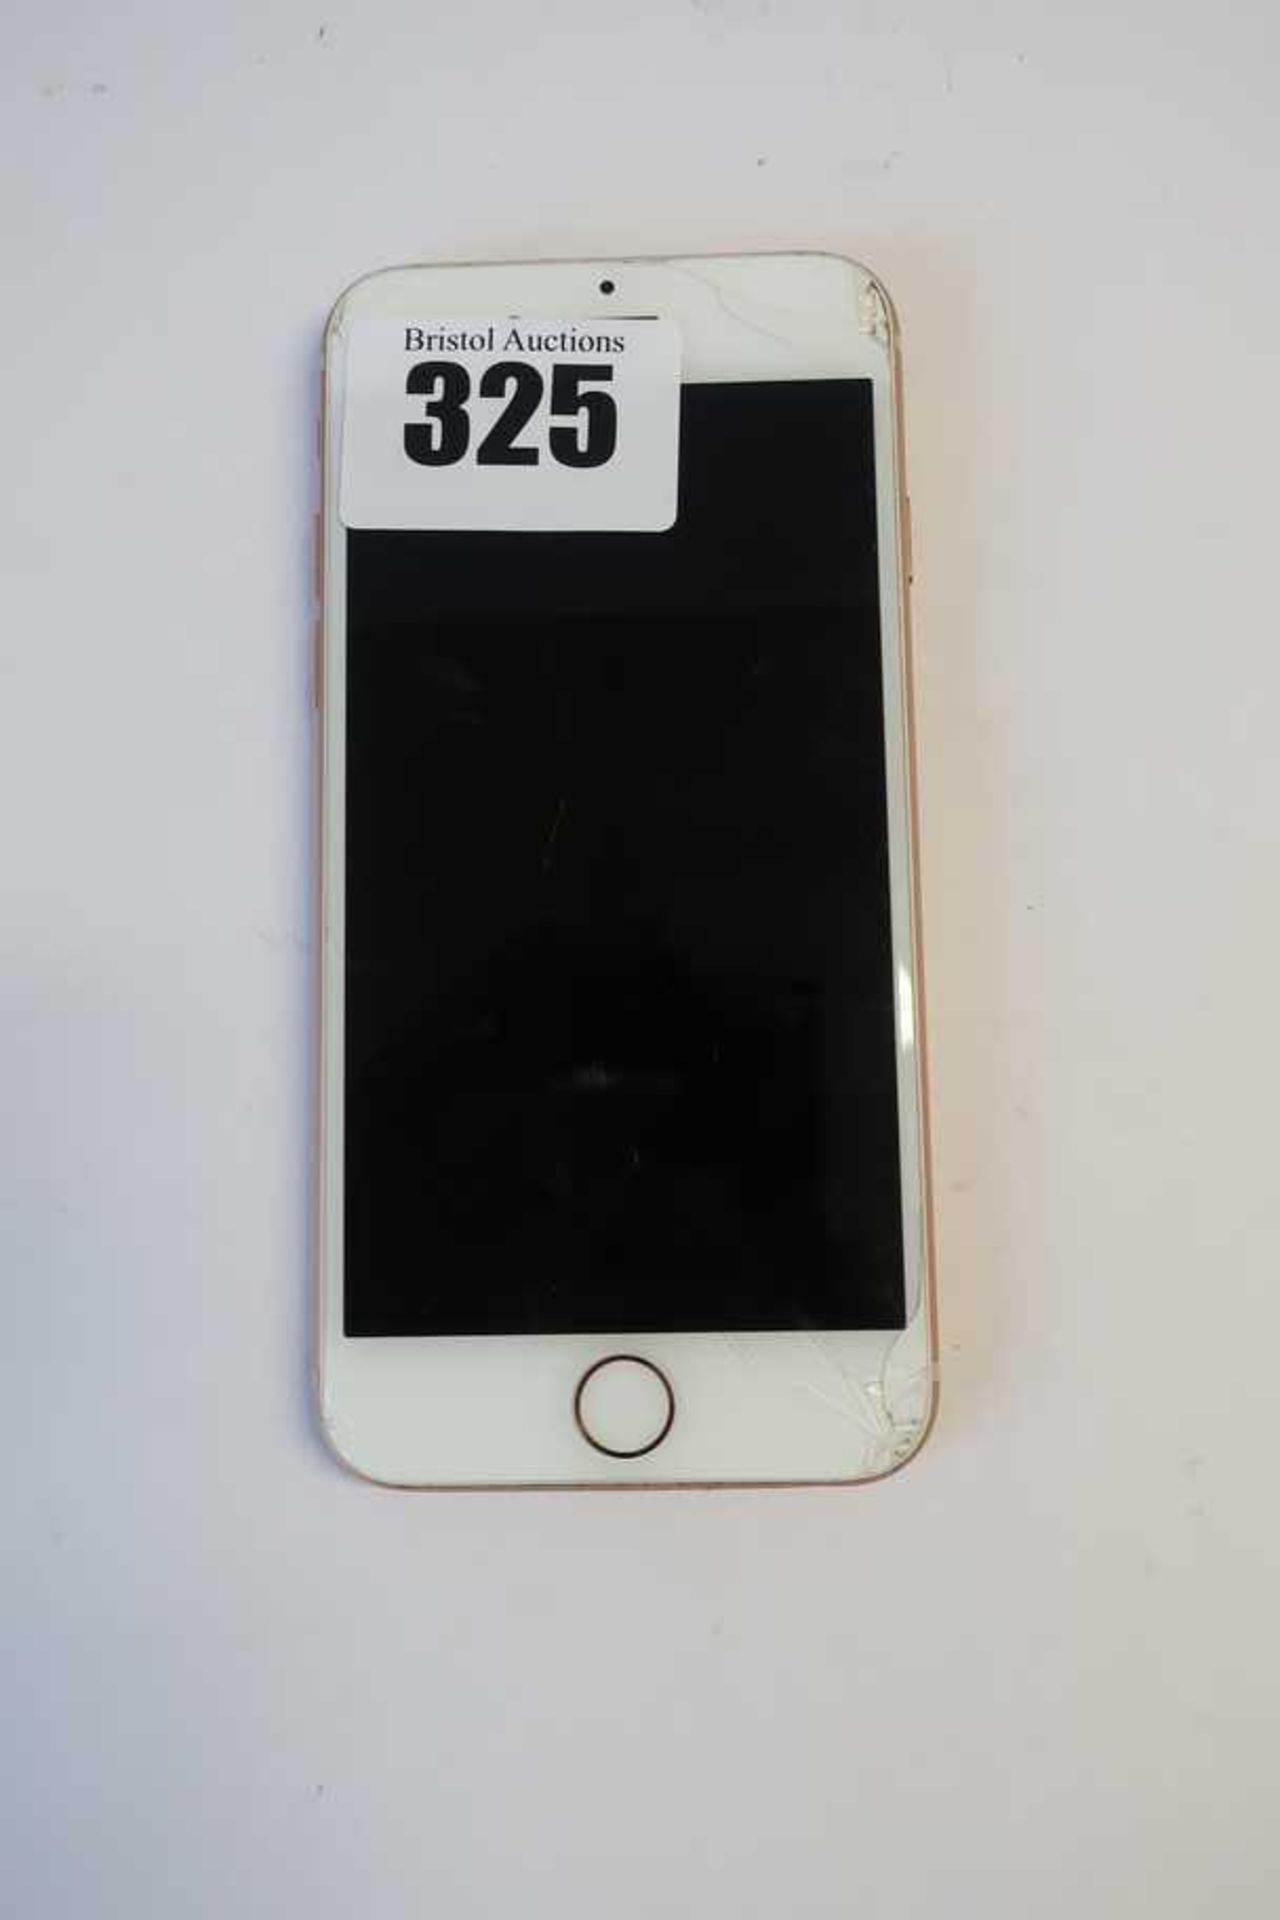 A pre-owned Apple iPhone 8 (AT&T/T-Mobile/Global/A1905) 64GB in Gold (IMEI: 356761085856877) (iCloud